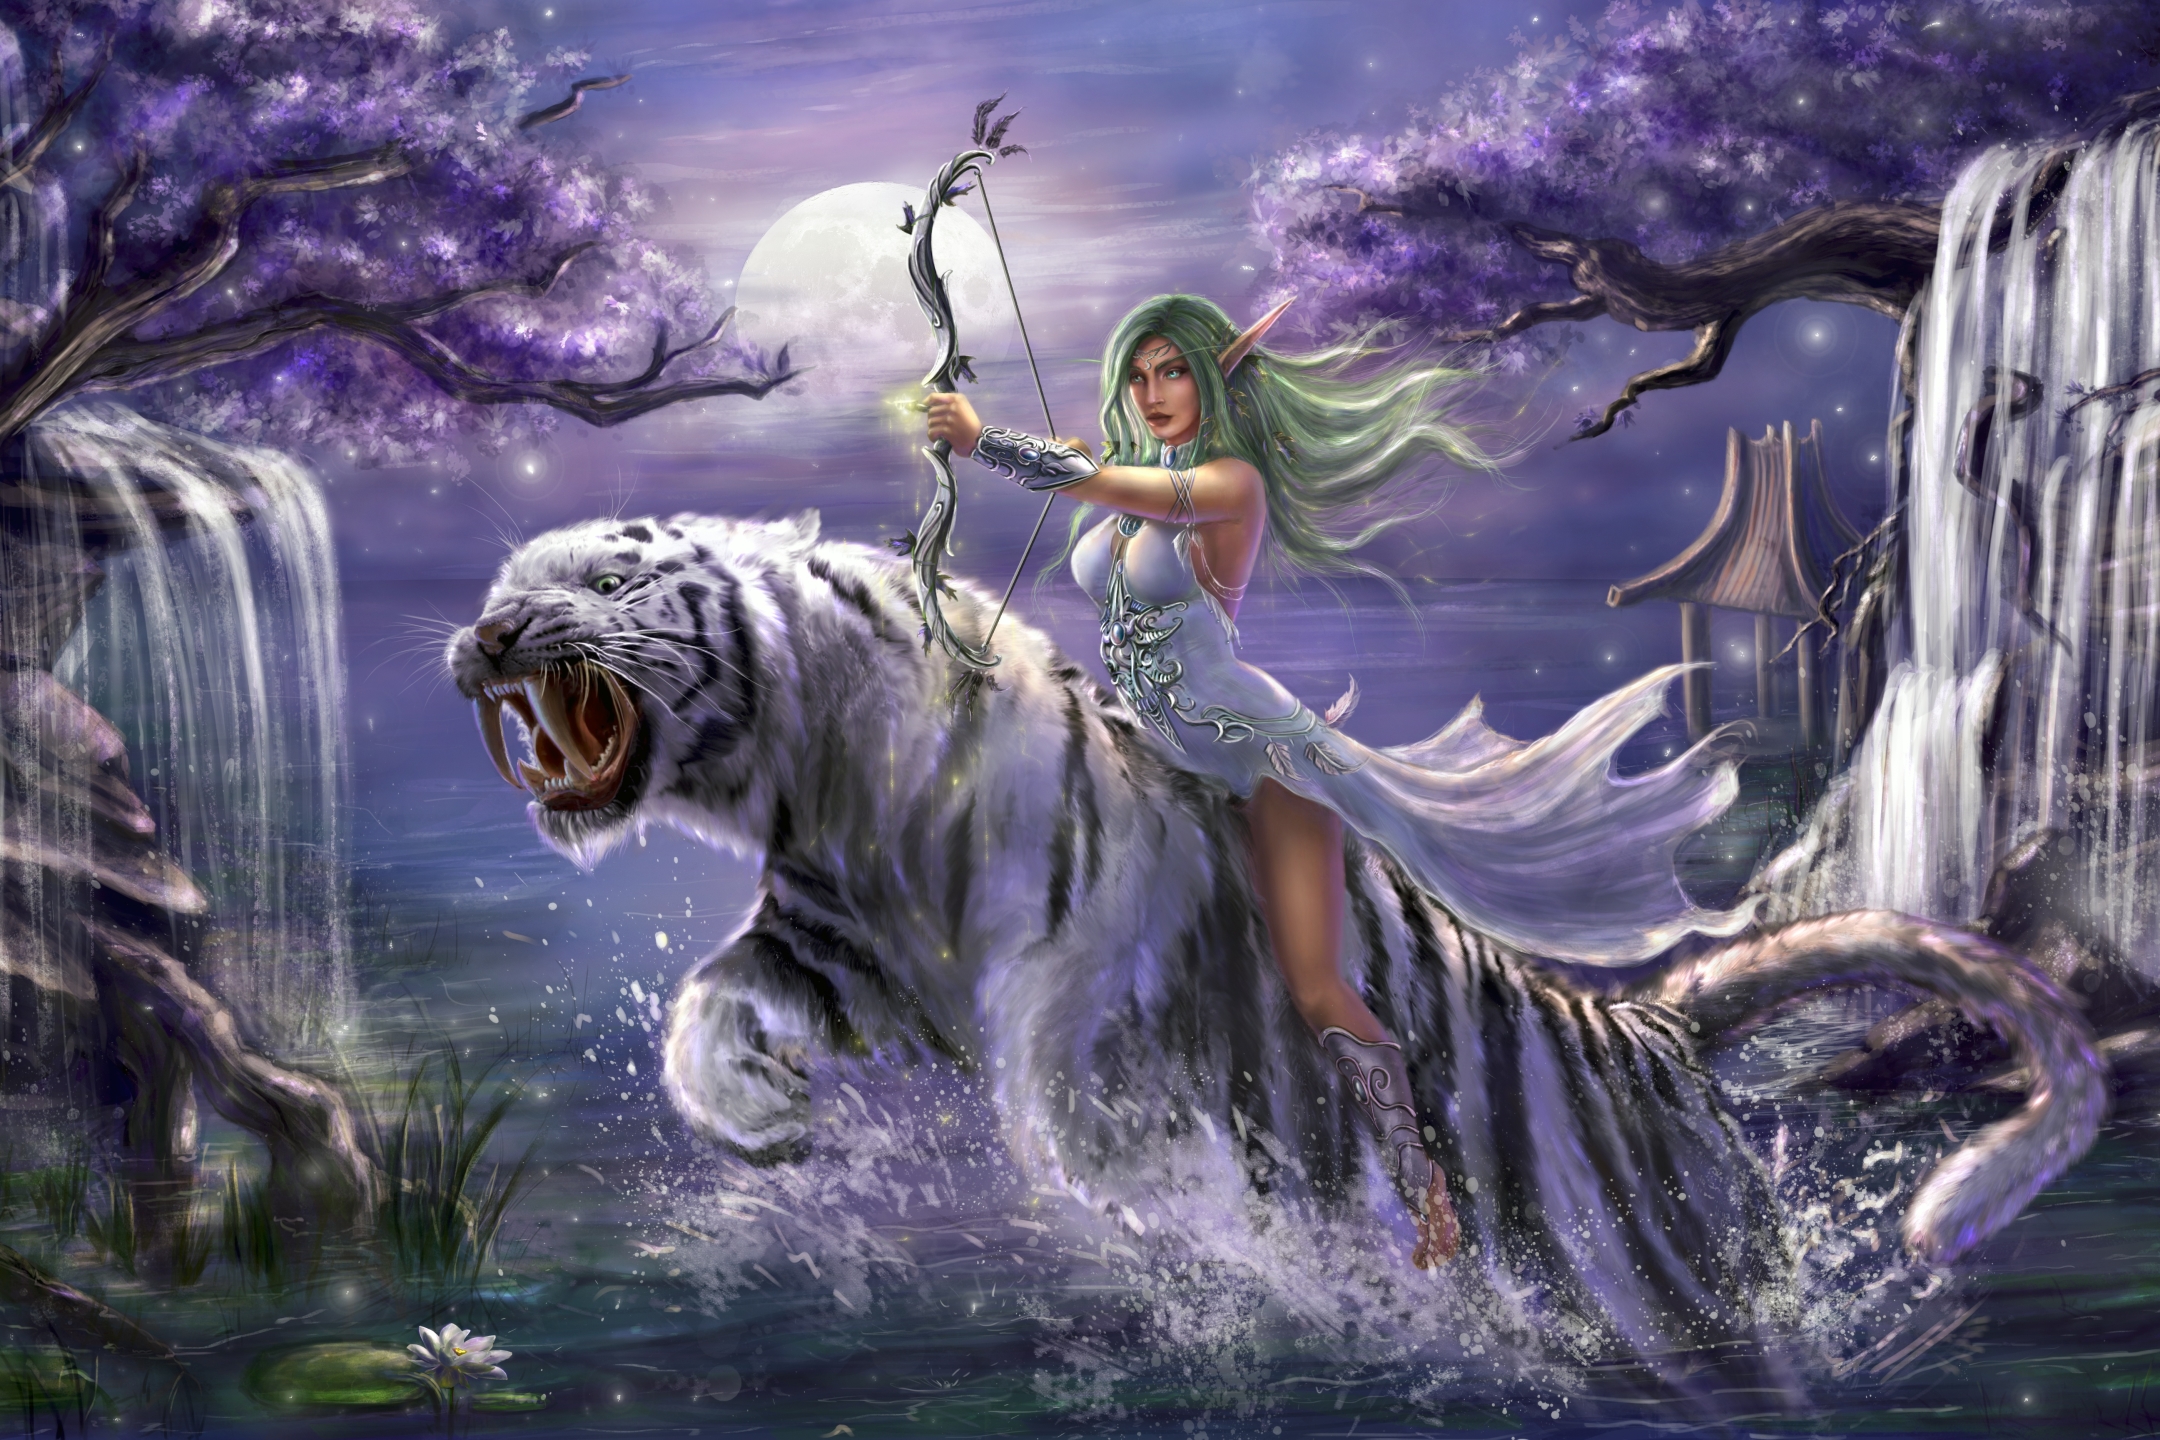 video game, world of warcraft, bow, white tiger, woman warrior, tyrande whisperwind, pointed ears, green hair, blue eyes, tiger, elf, warcraft